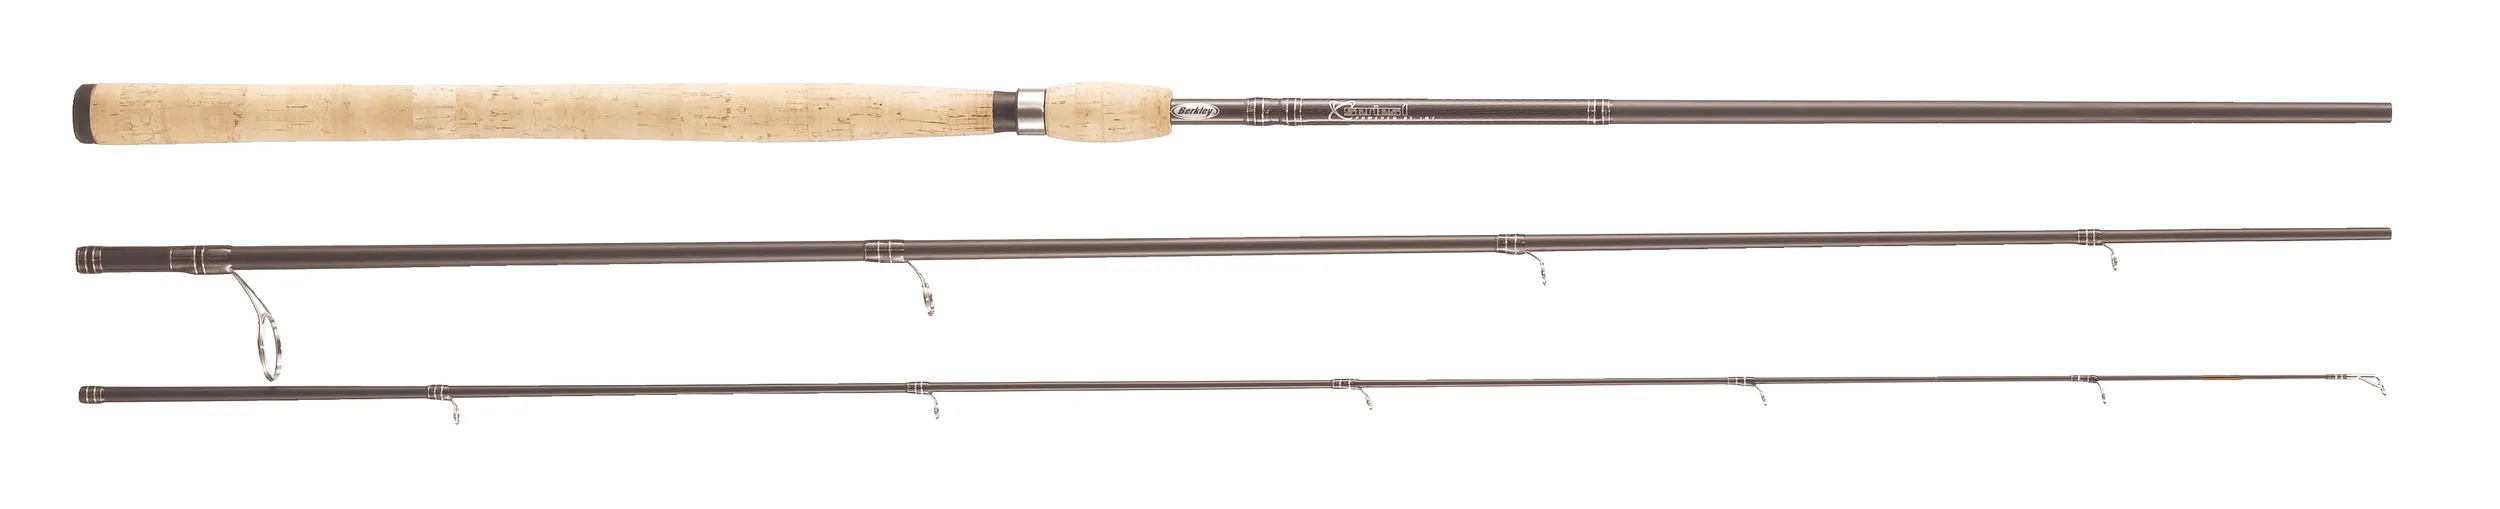 ROD SERIES ONE 333 8/38 SPECIALIST